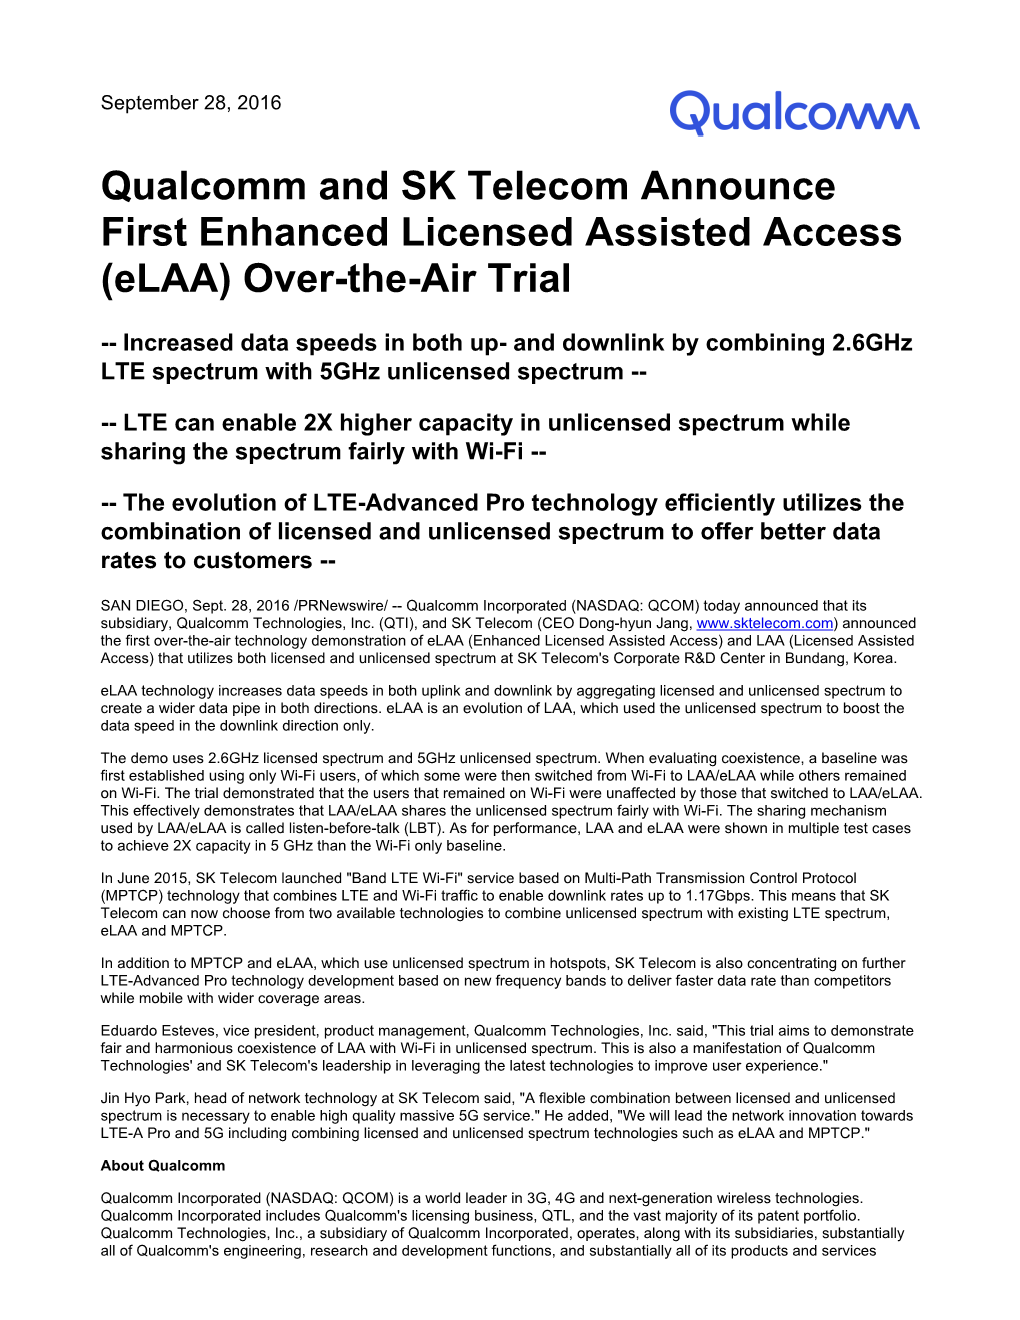 Qualcomm and SK Telecom Announce First Enhanced Licensed Assisted Access (Elaa) Over-The-Air Trial